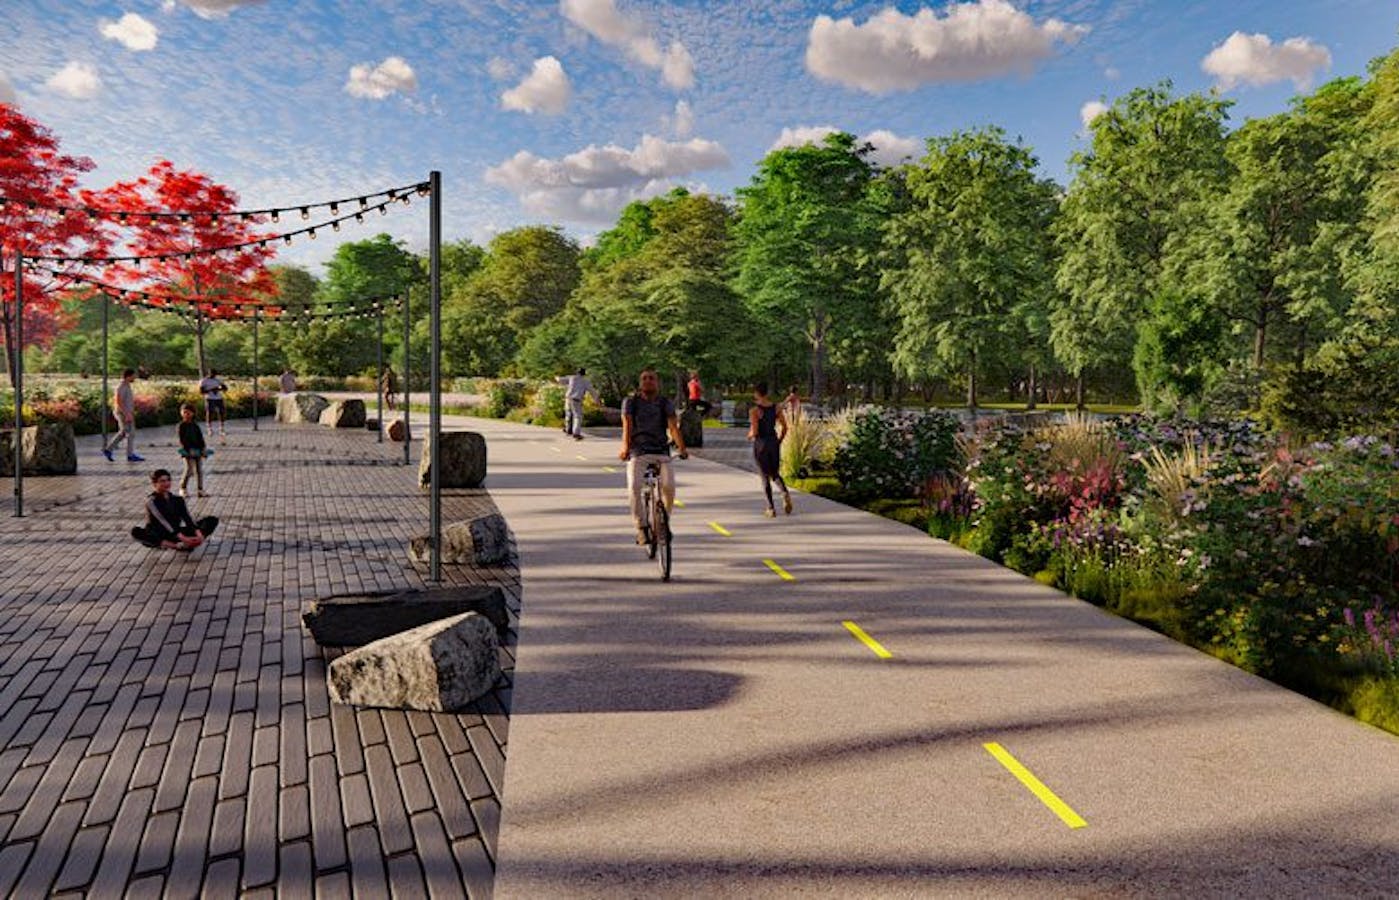 With a $25 million RAISE grant, Conway, Arkansas, will construct 15 miles of multi-use paths, cycle tracks, and trailheads as part of its ambitious Connect Conway Project. (Image credit: City of Conway, Connect Conway RAISE grant application)